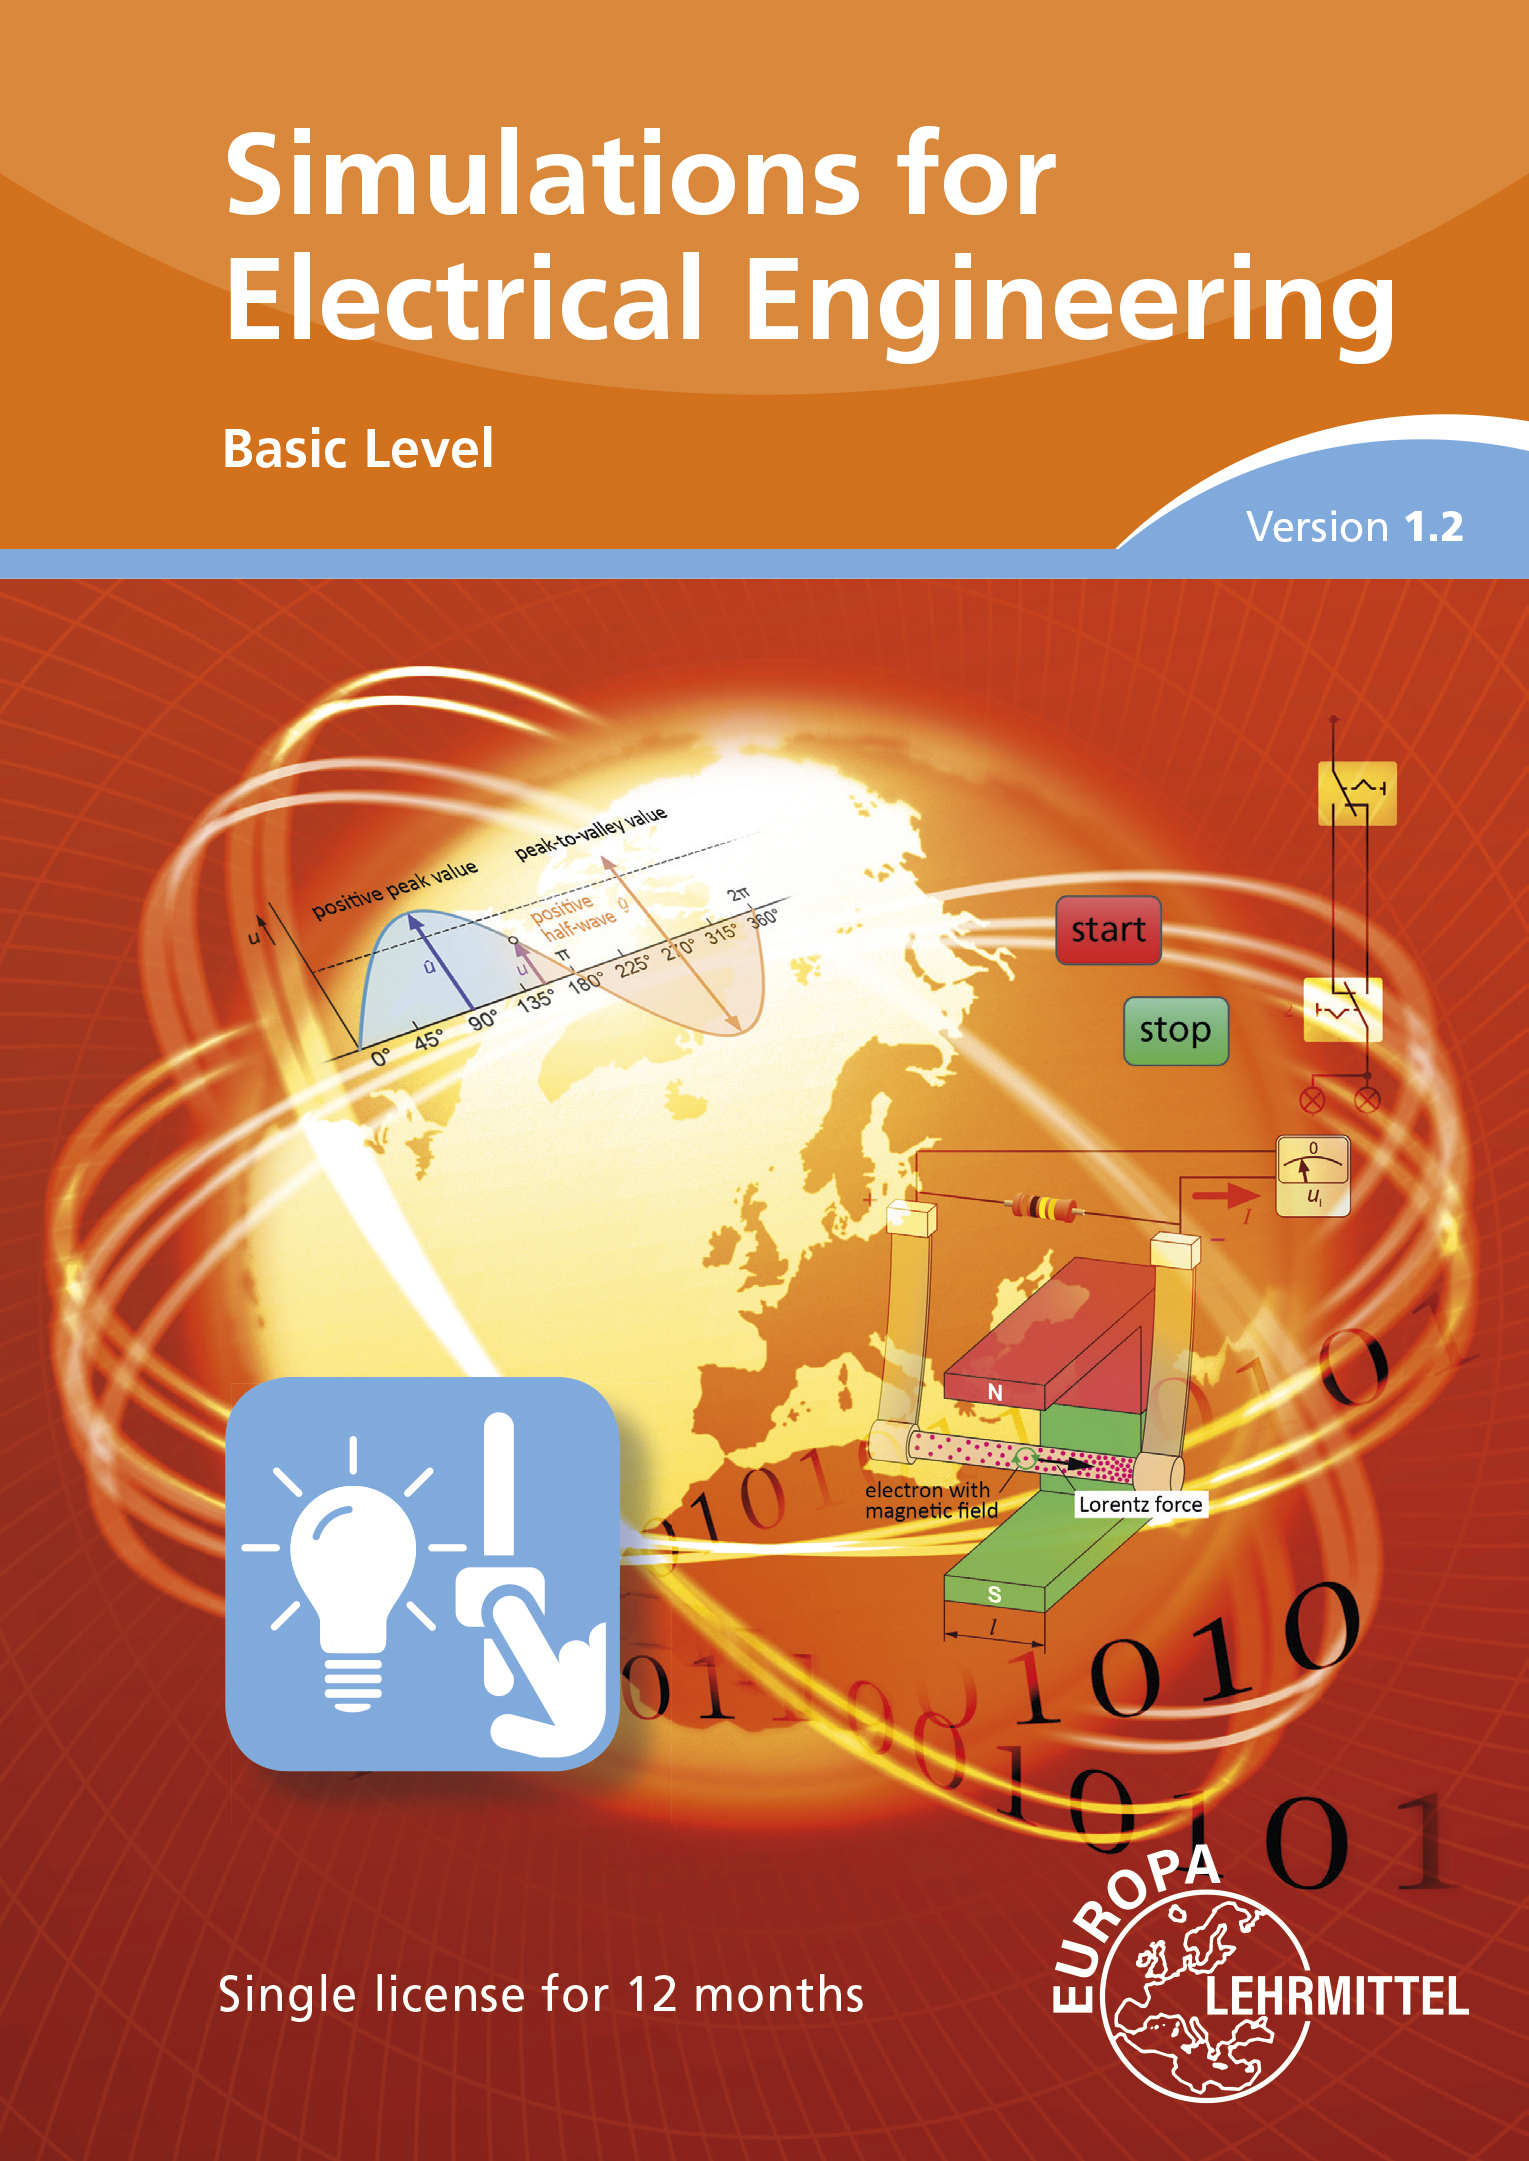 Simulations for Electrical Engineering Basic Level 1.2 - single license